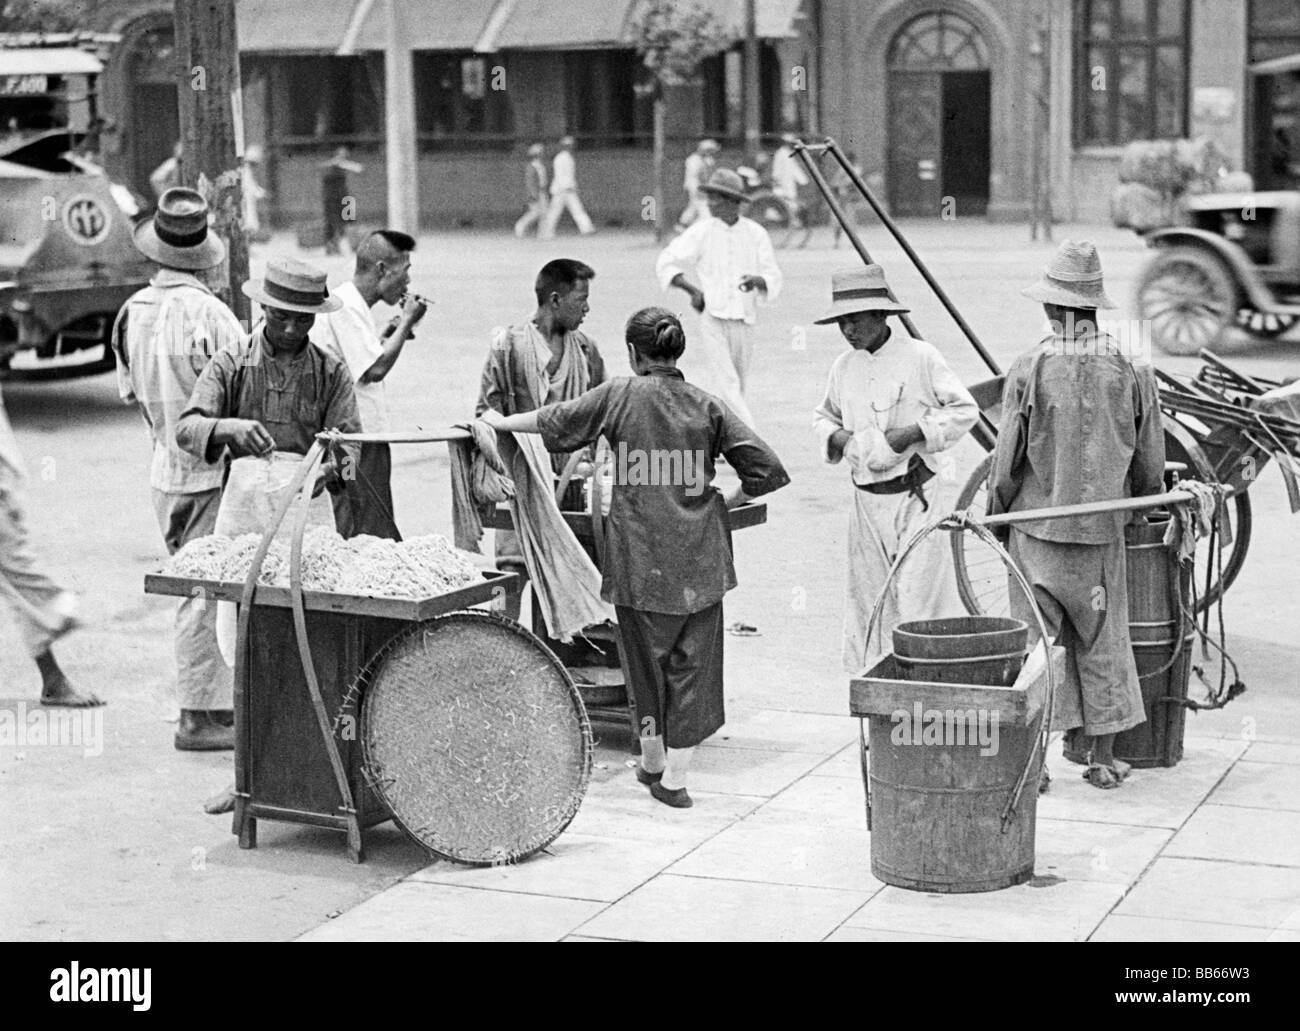 geography / travel, people, street scene, 1st half of the 20th century, street hawker, hawkers, market trader, traders, lorries, rickshaw, ricksha, Asia, passers-by, scenes, historic, historical, Stock Photo